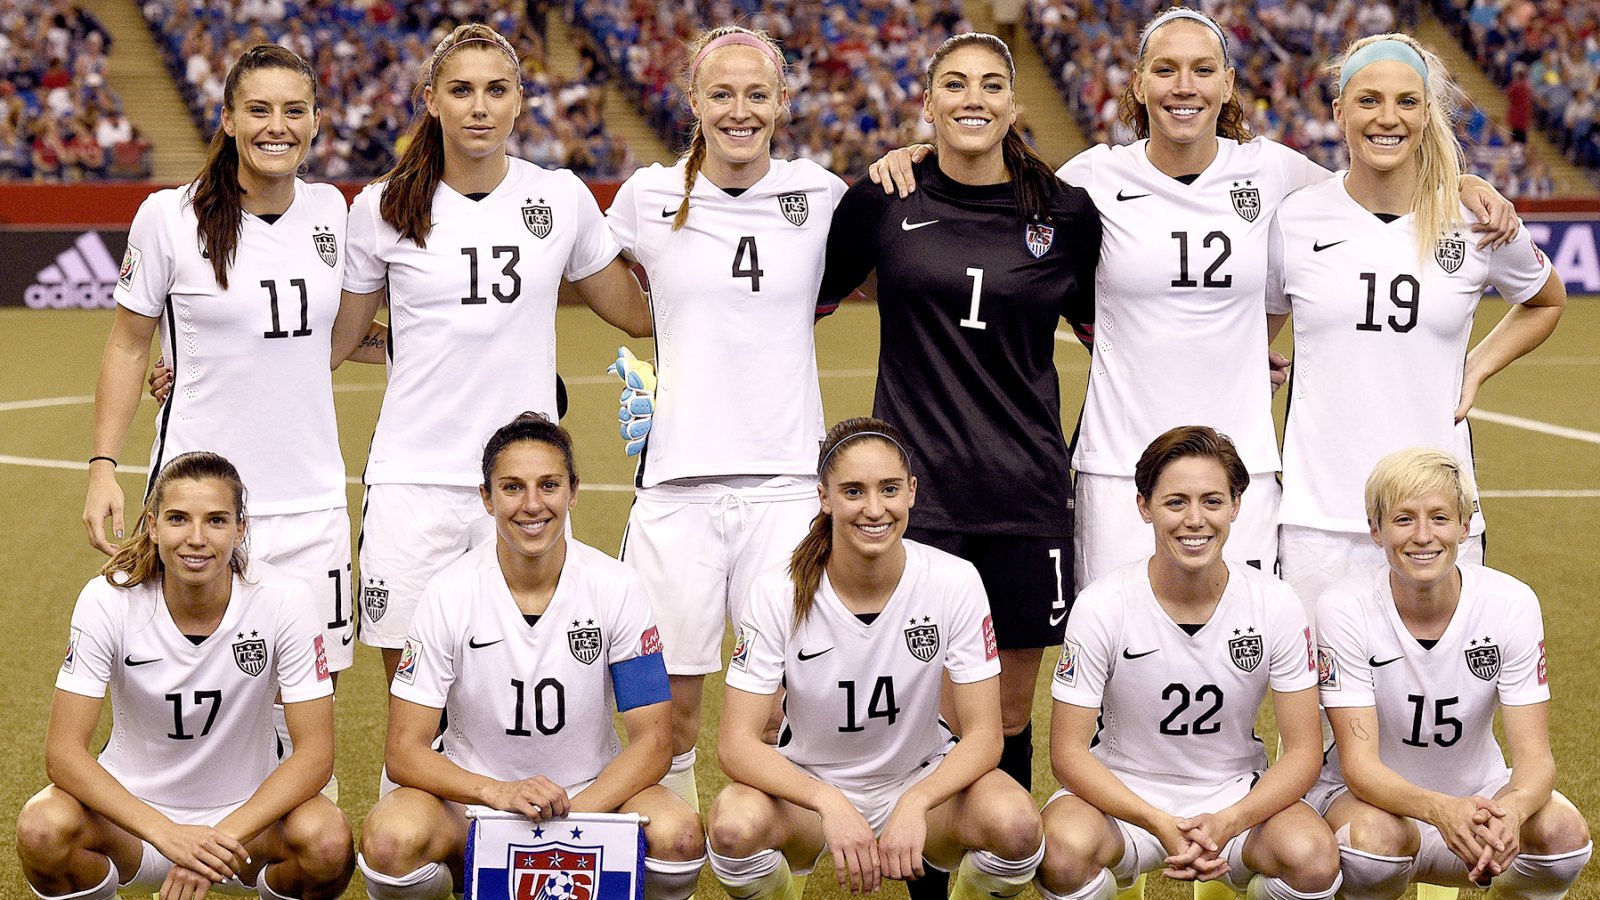 Members of the US Women's National Soccer Team pose during the 2015 FIFA Women's World Cup